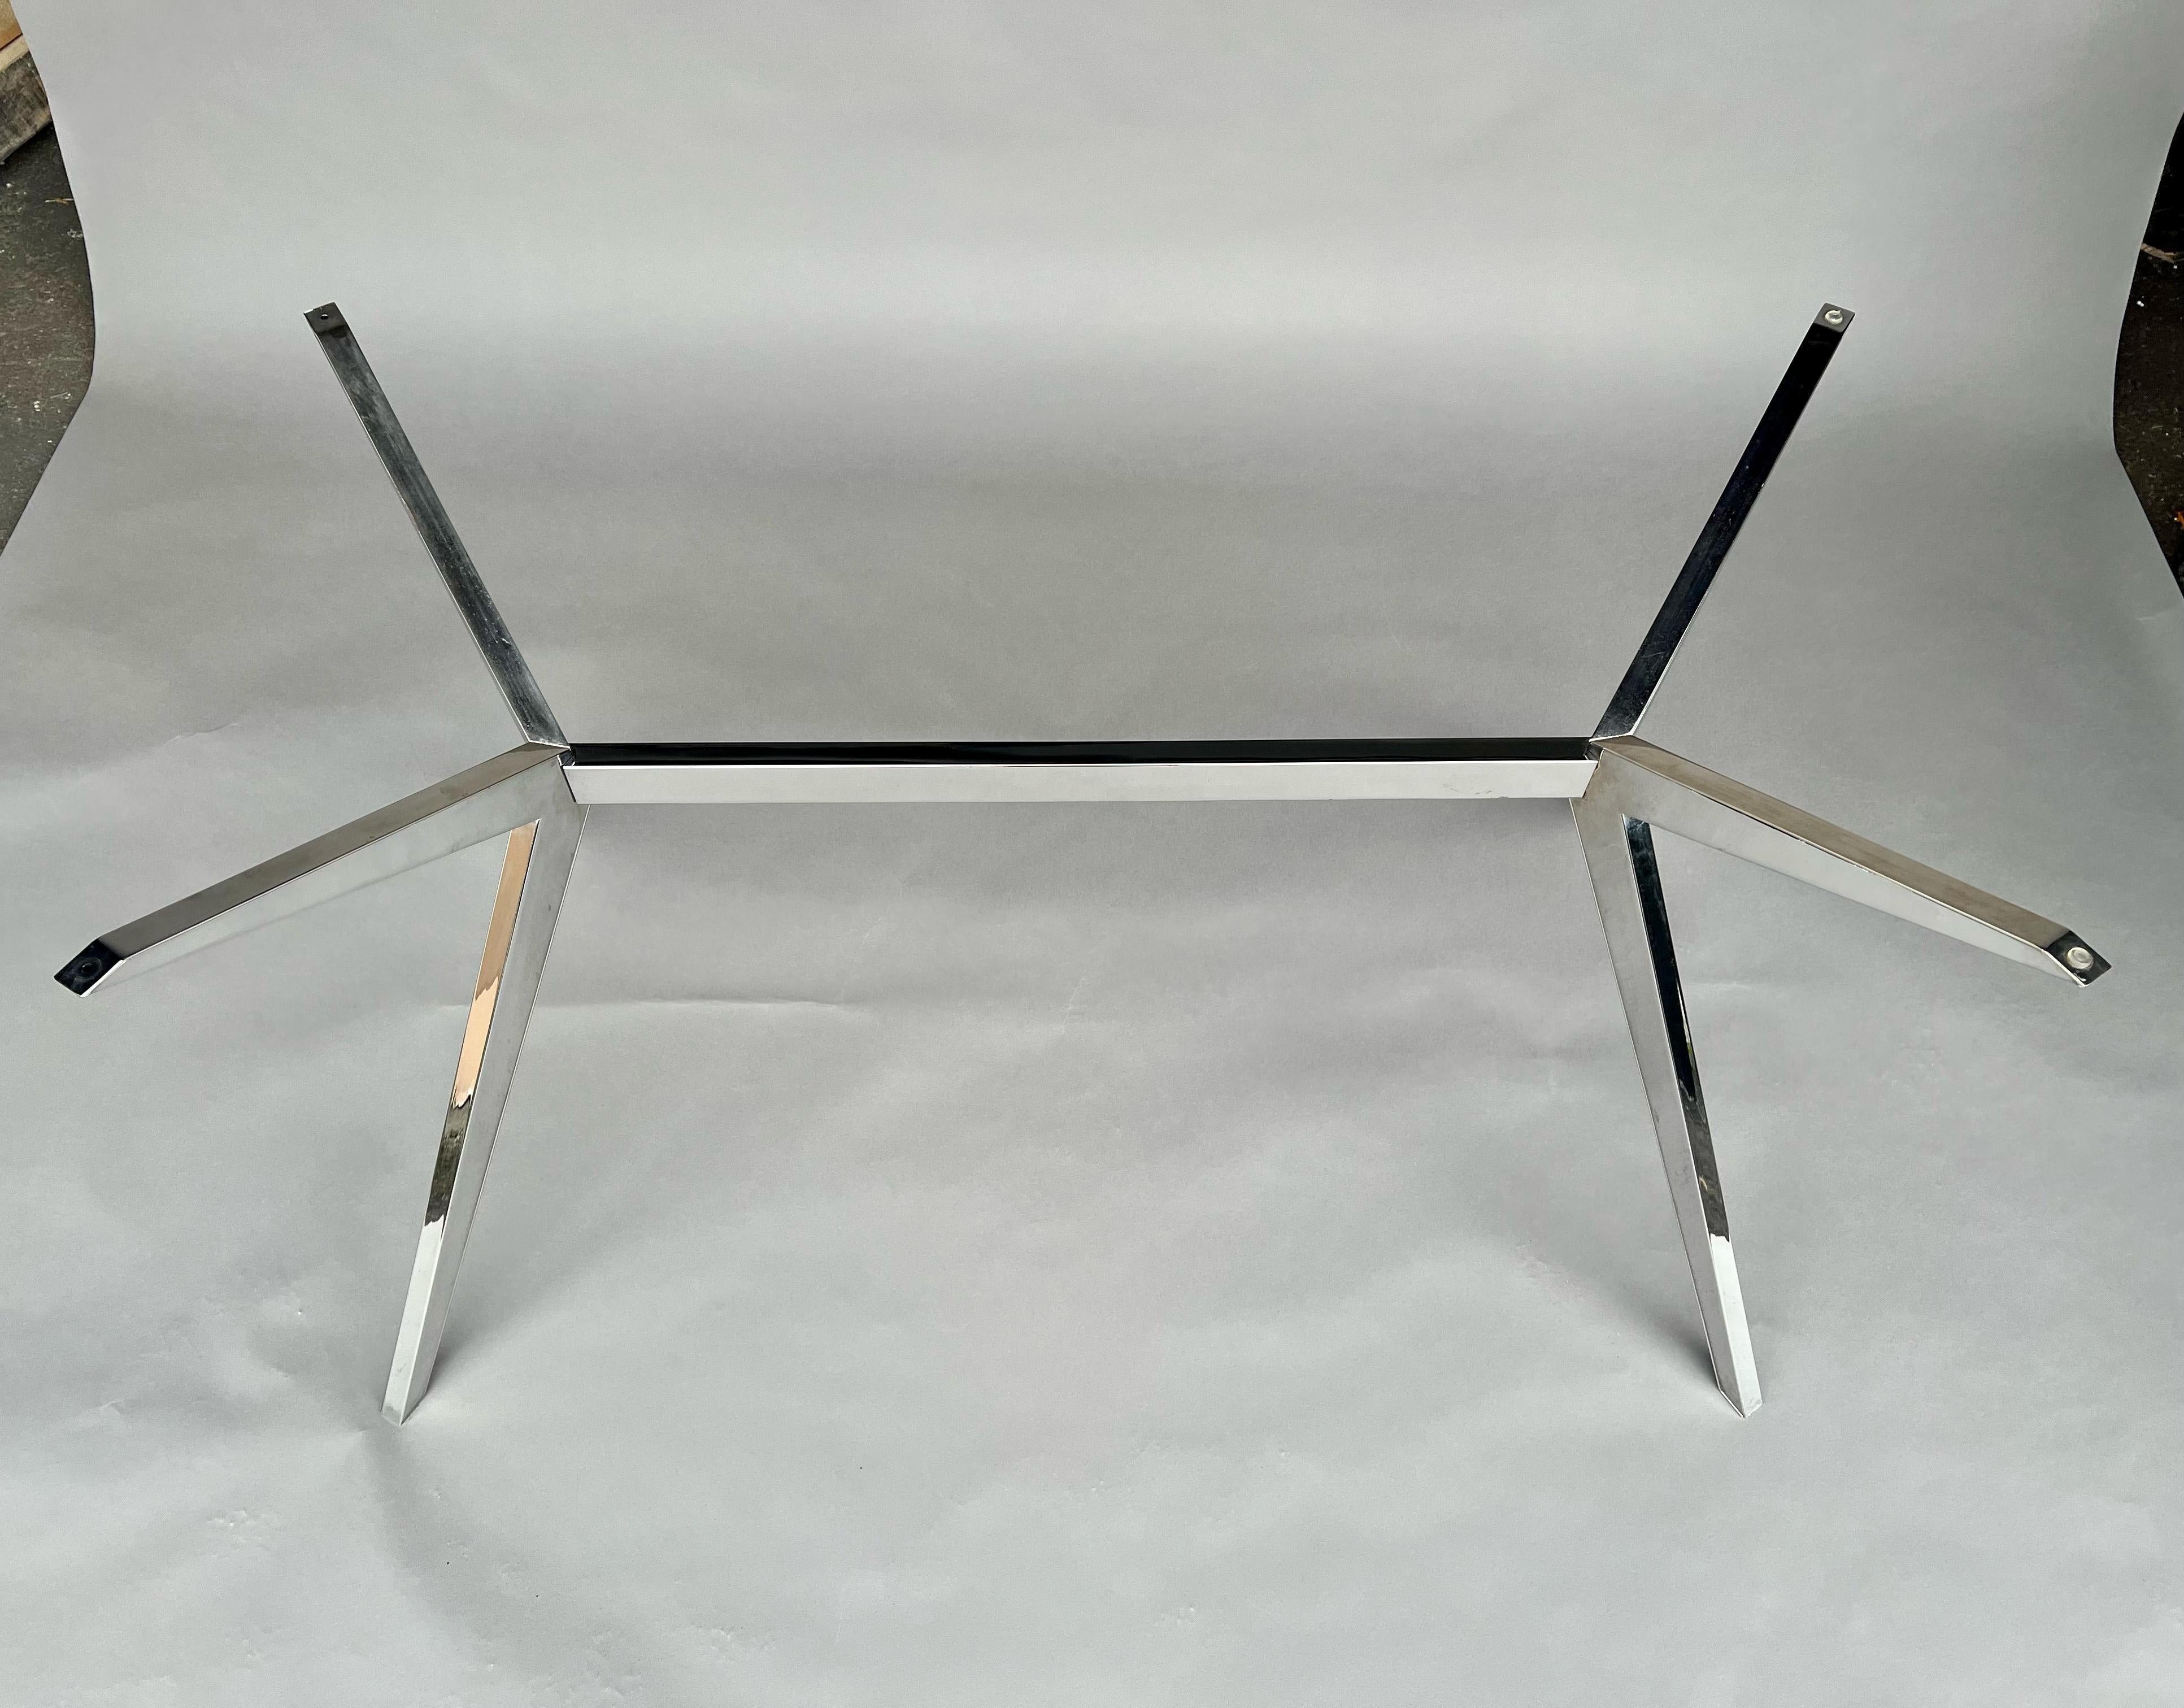 This Fendi Chrome Sculptural Table has beautiful clean lines and a modern aesthetic.